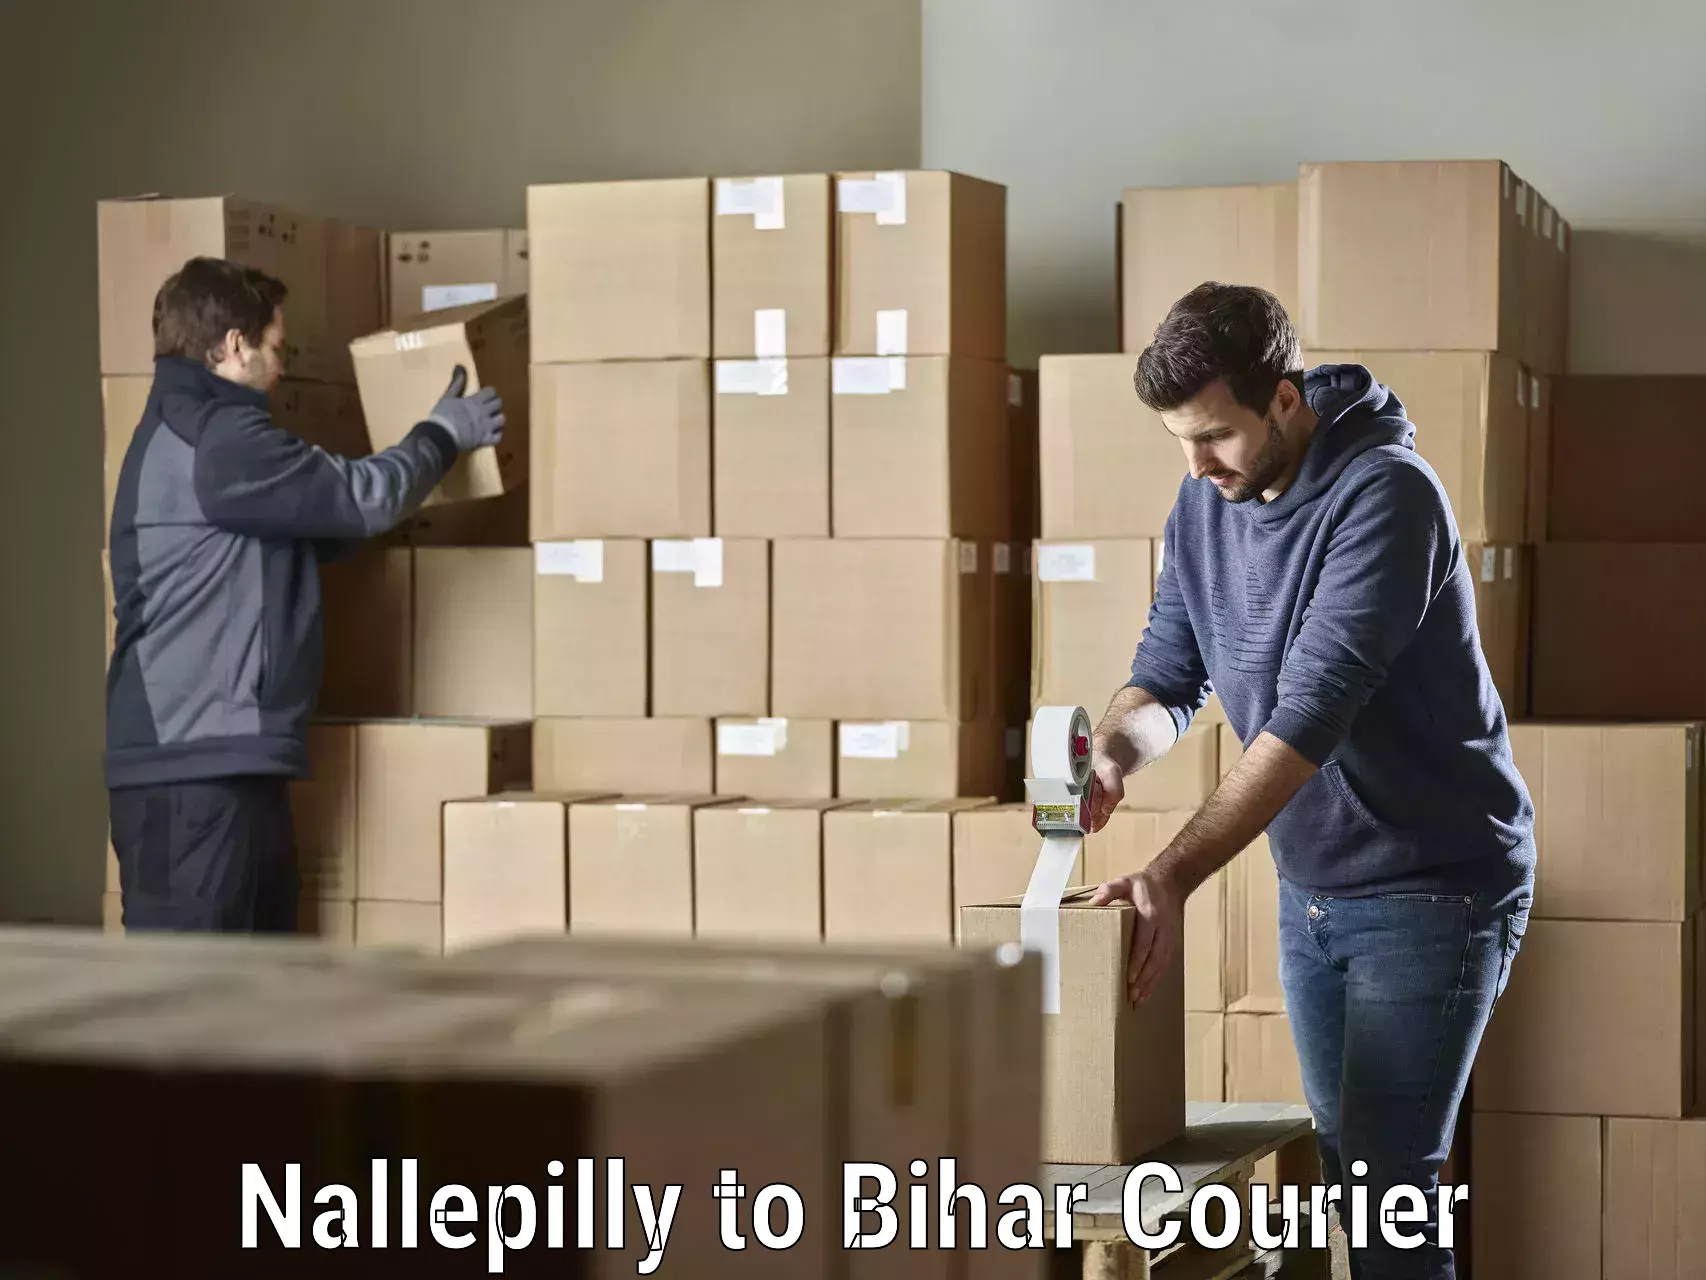 Courier service innovation Nallepilly to Rajgir